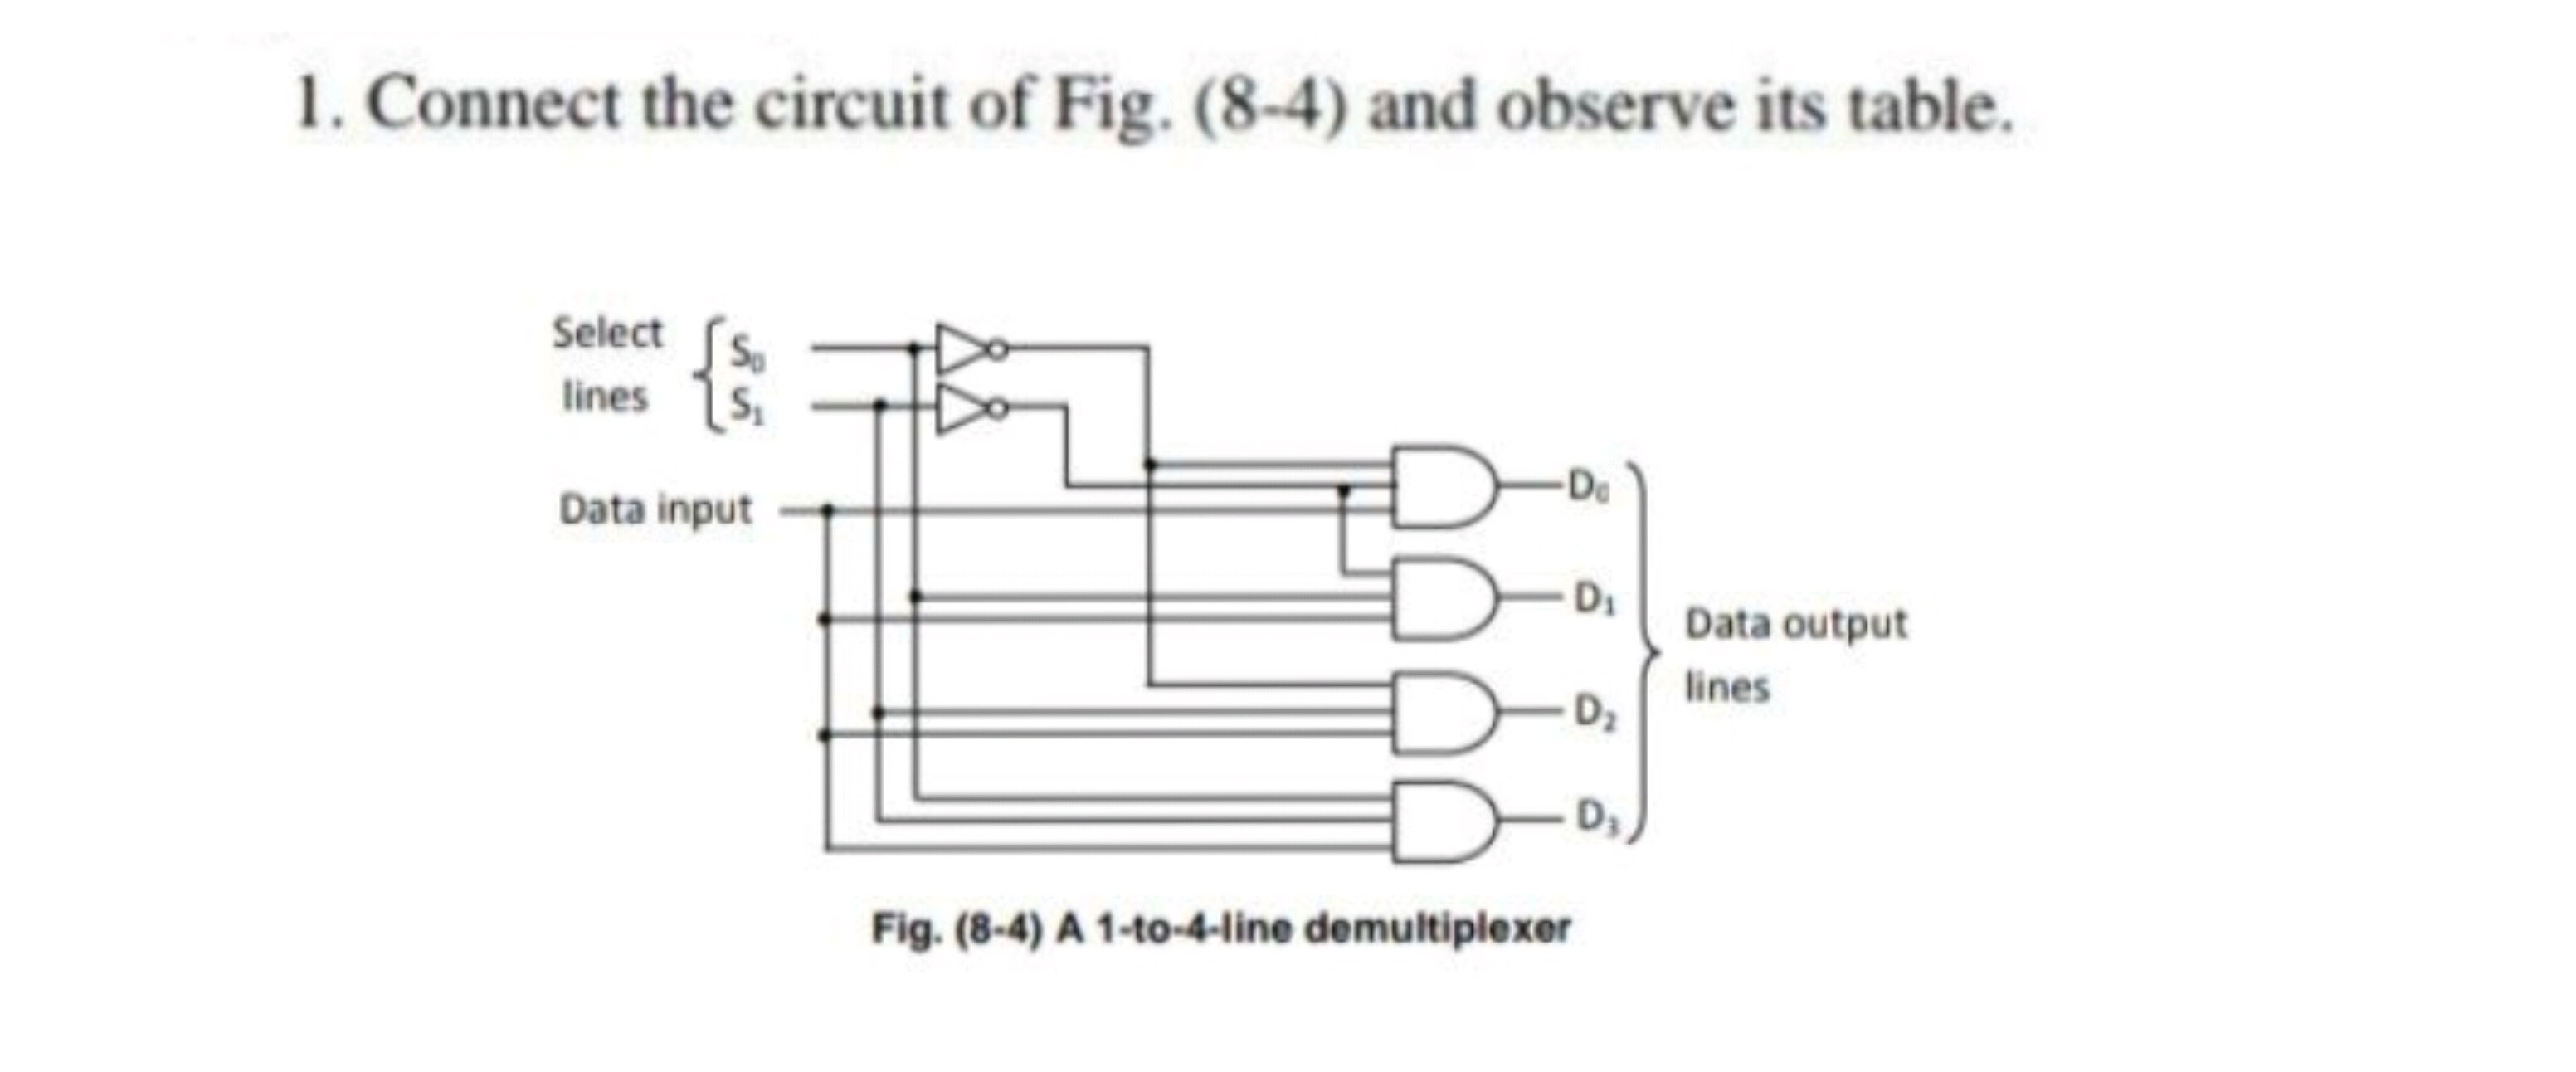 1. Connect the circuit of Fig. (8-4) and observe its table.
Select
Sp
lines 1s.
Da
Data input
Data output
lines
D2
Fig. (8-4) A 1-to-4-line demultiplexer
